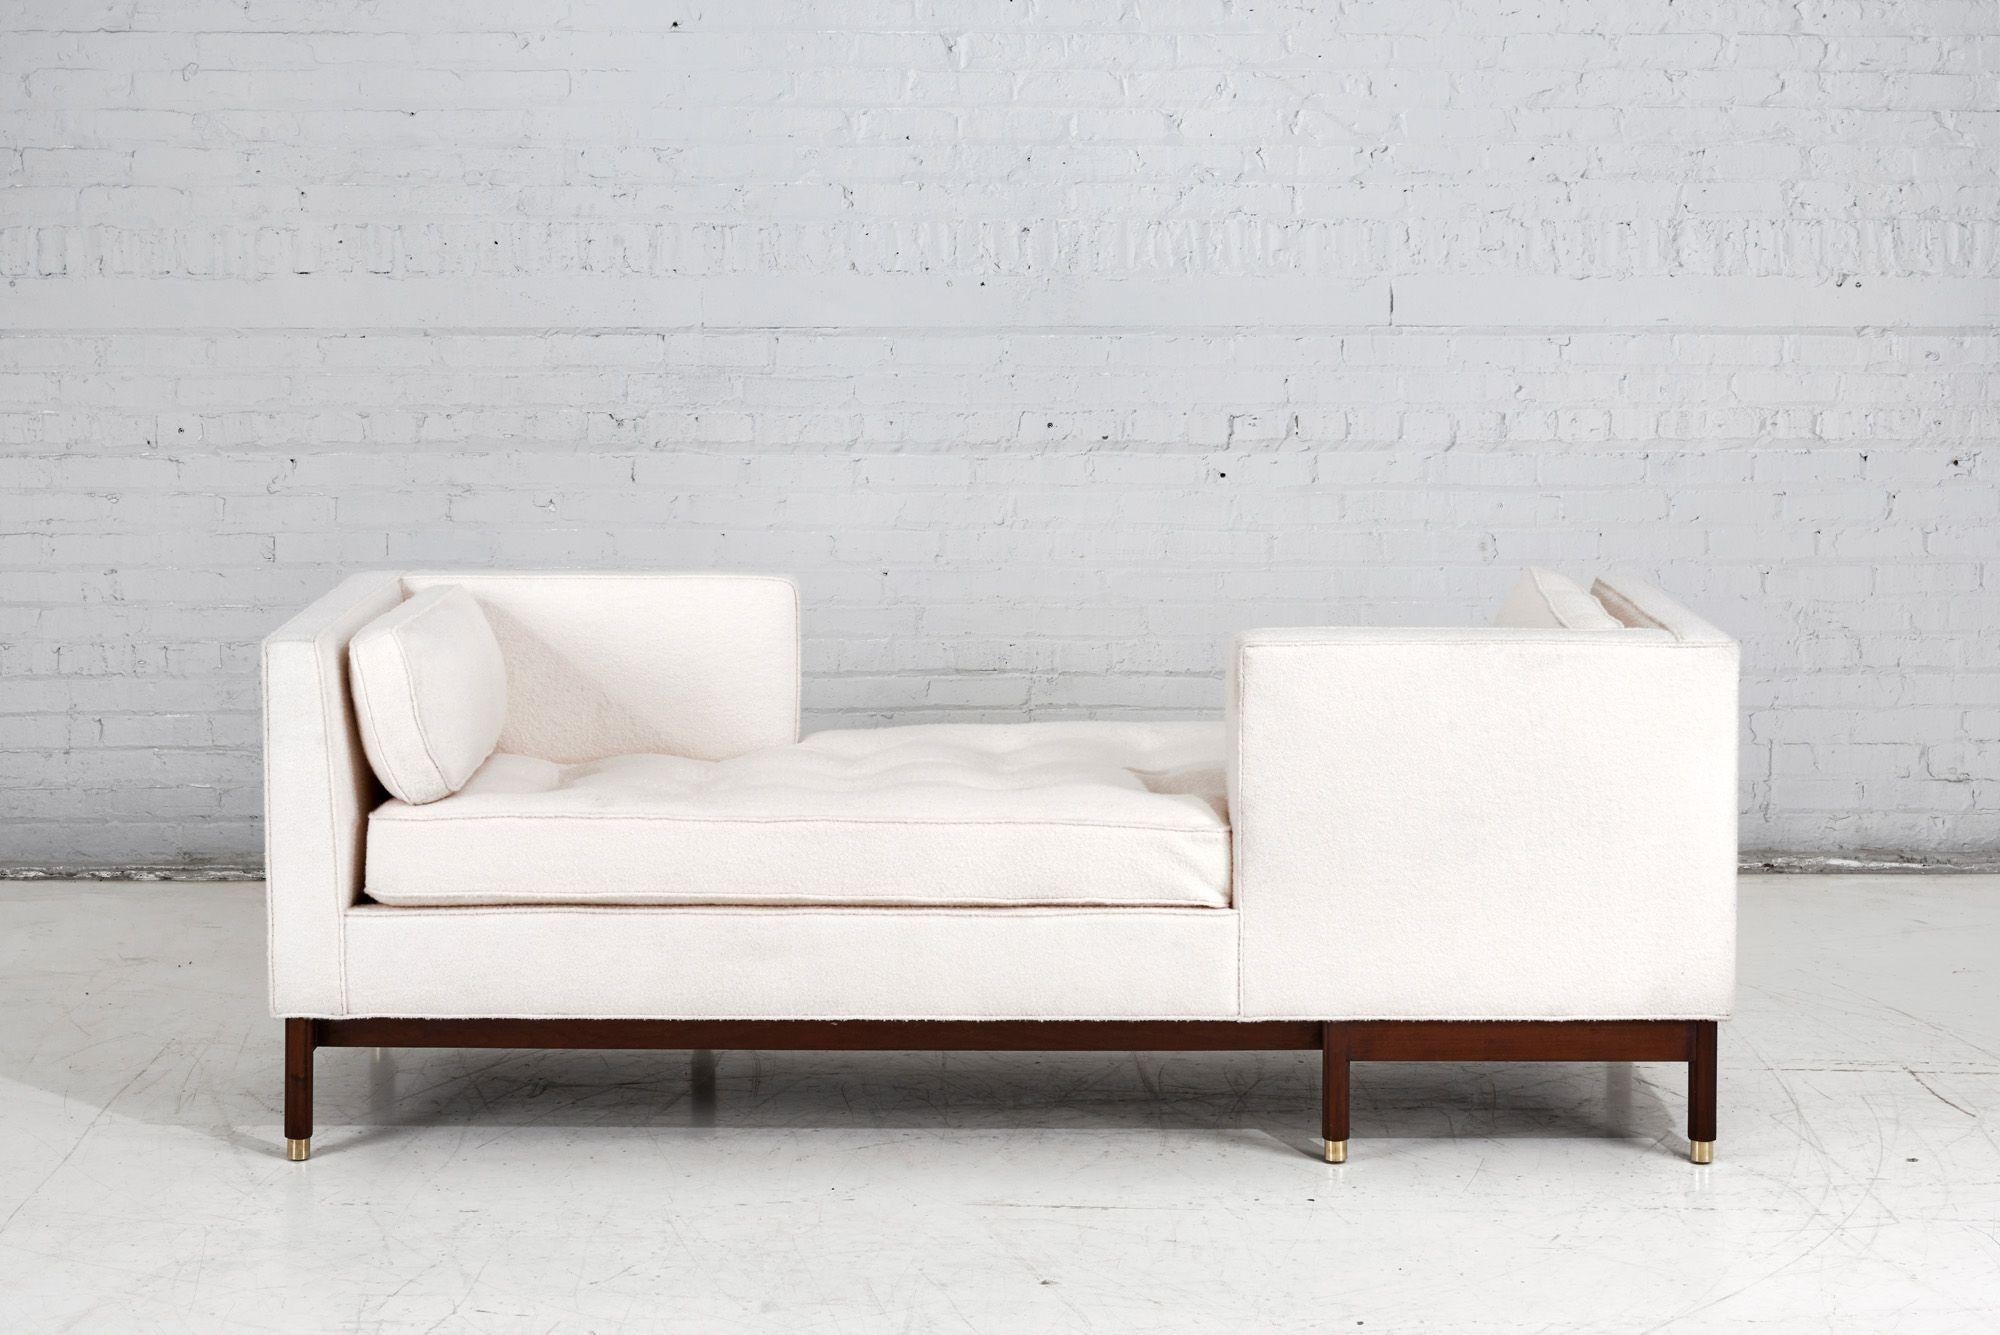 Edward Wormley Tete-a-Tete Sofa for Dunbar White Boucle, 1950.  Restored and reupholstered in white boucle. Mahogany legs with brass feet.